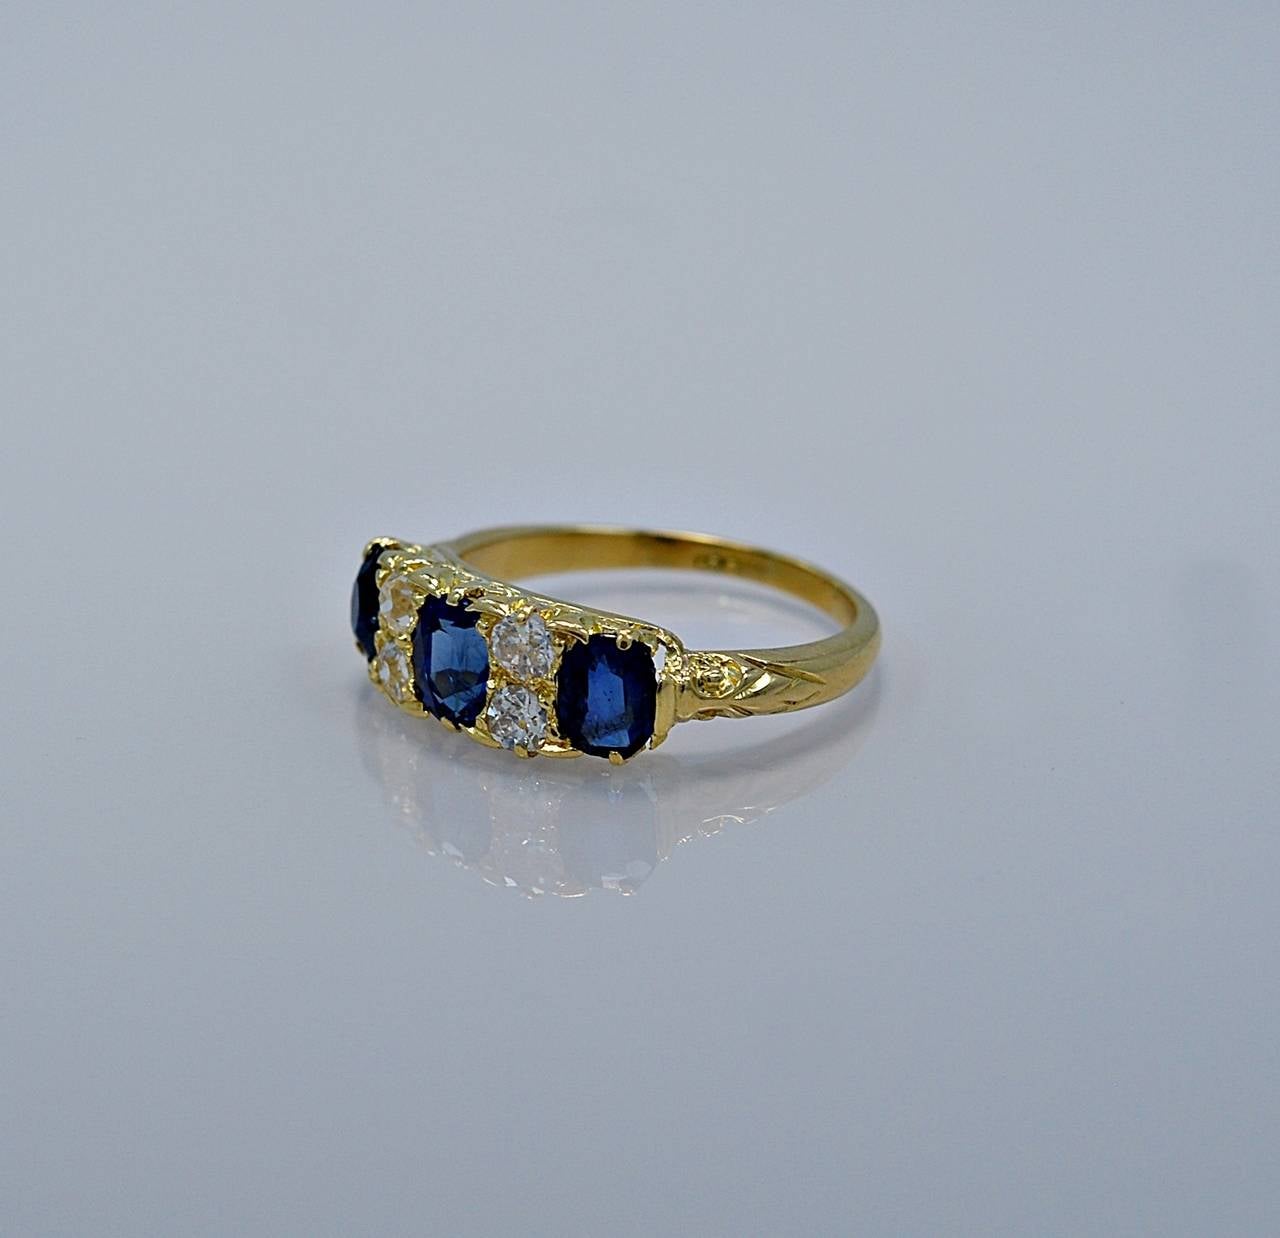 J35037

REASONABLE OFFERS CONSIDERED!

This spectacular Edwardian fashion ring or wedding band features 2.00ct. apx. T.W. of beautiful natural blue oval sapphires (which are unheated) and apx. .50ct. T.W. of round European cut diamonds. The